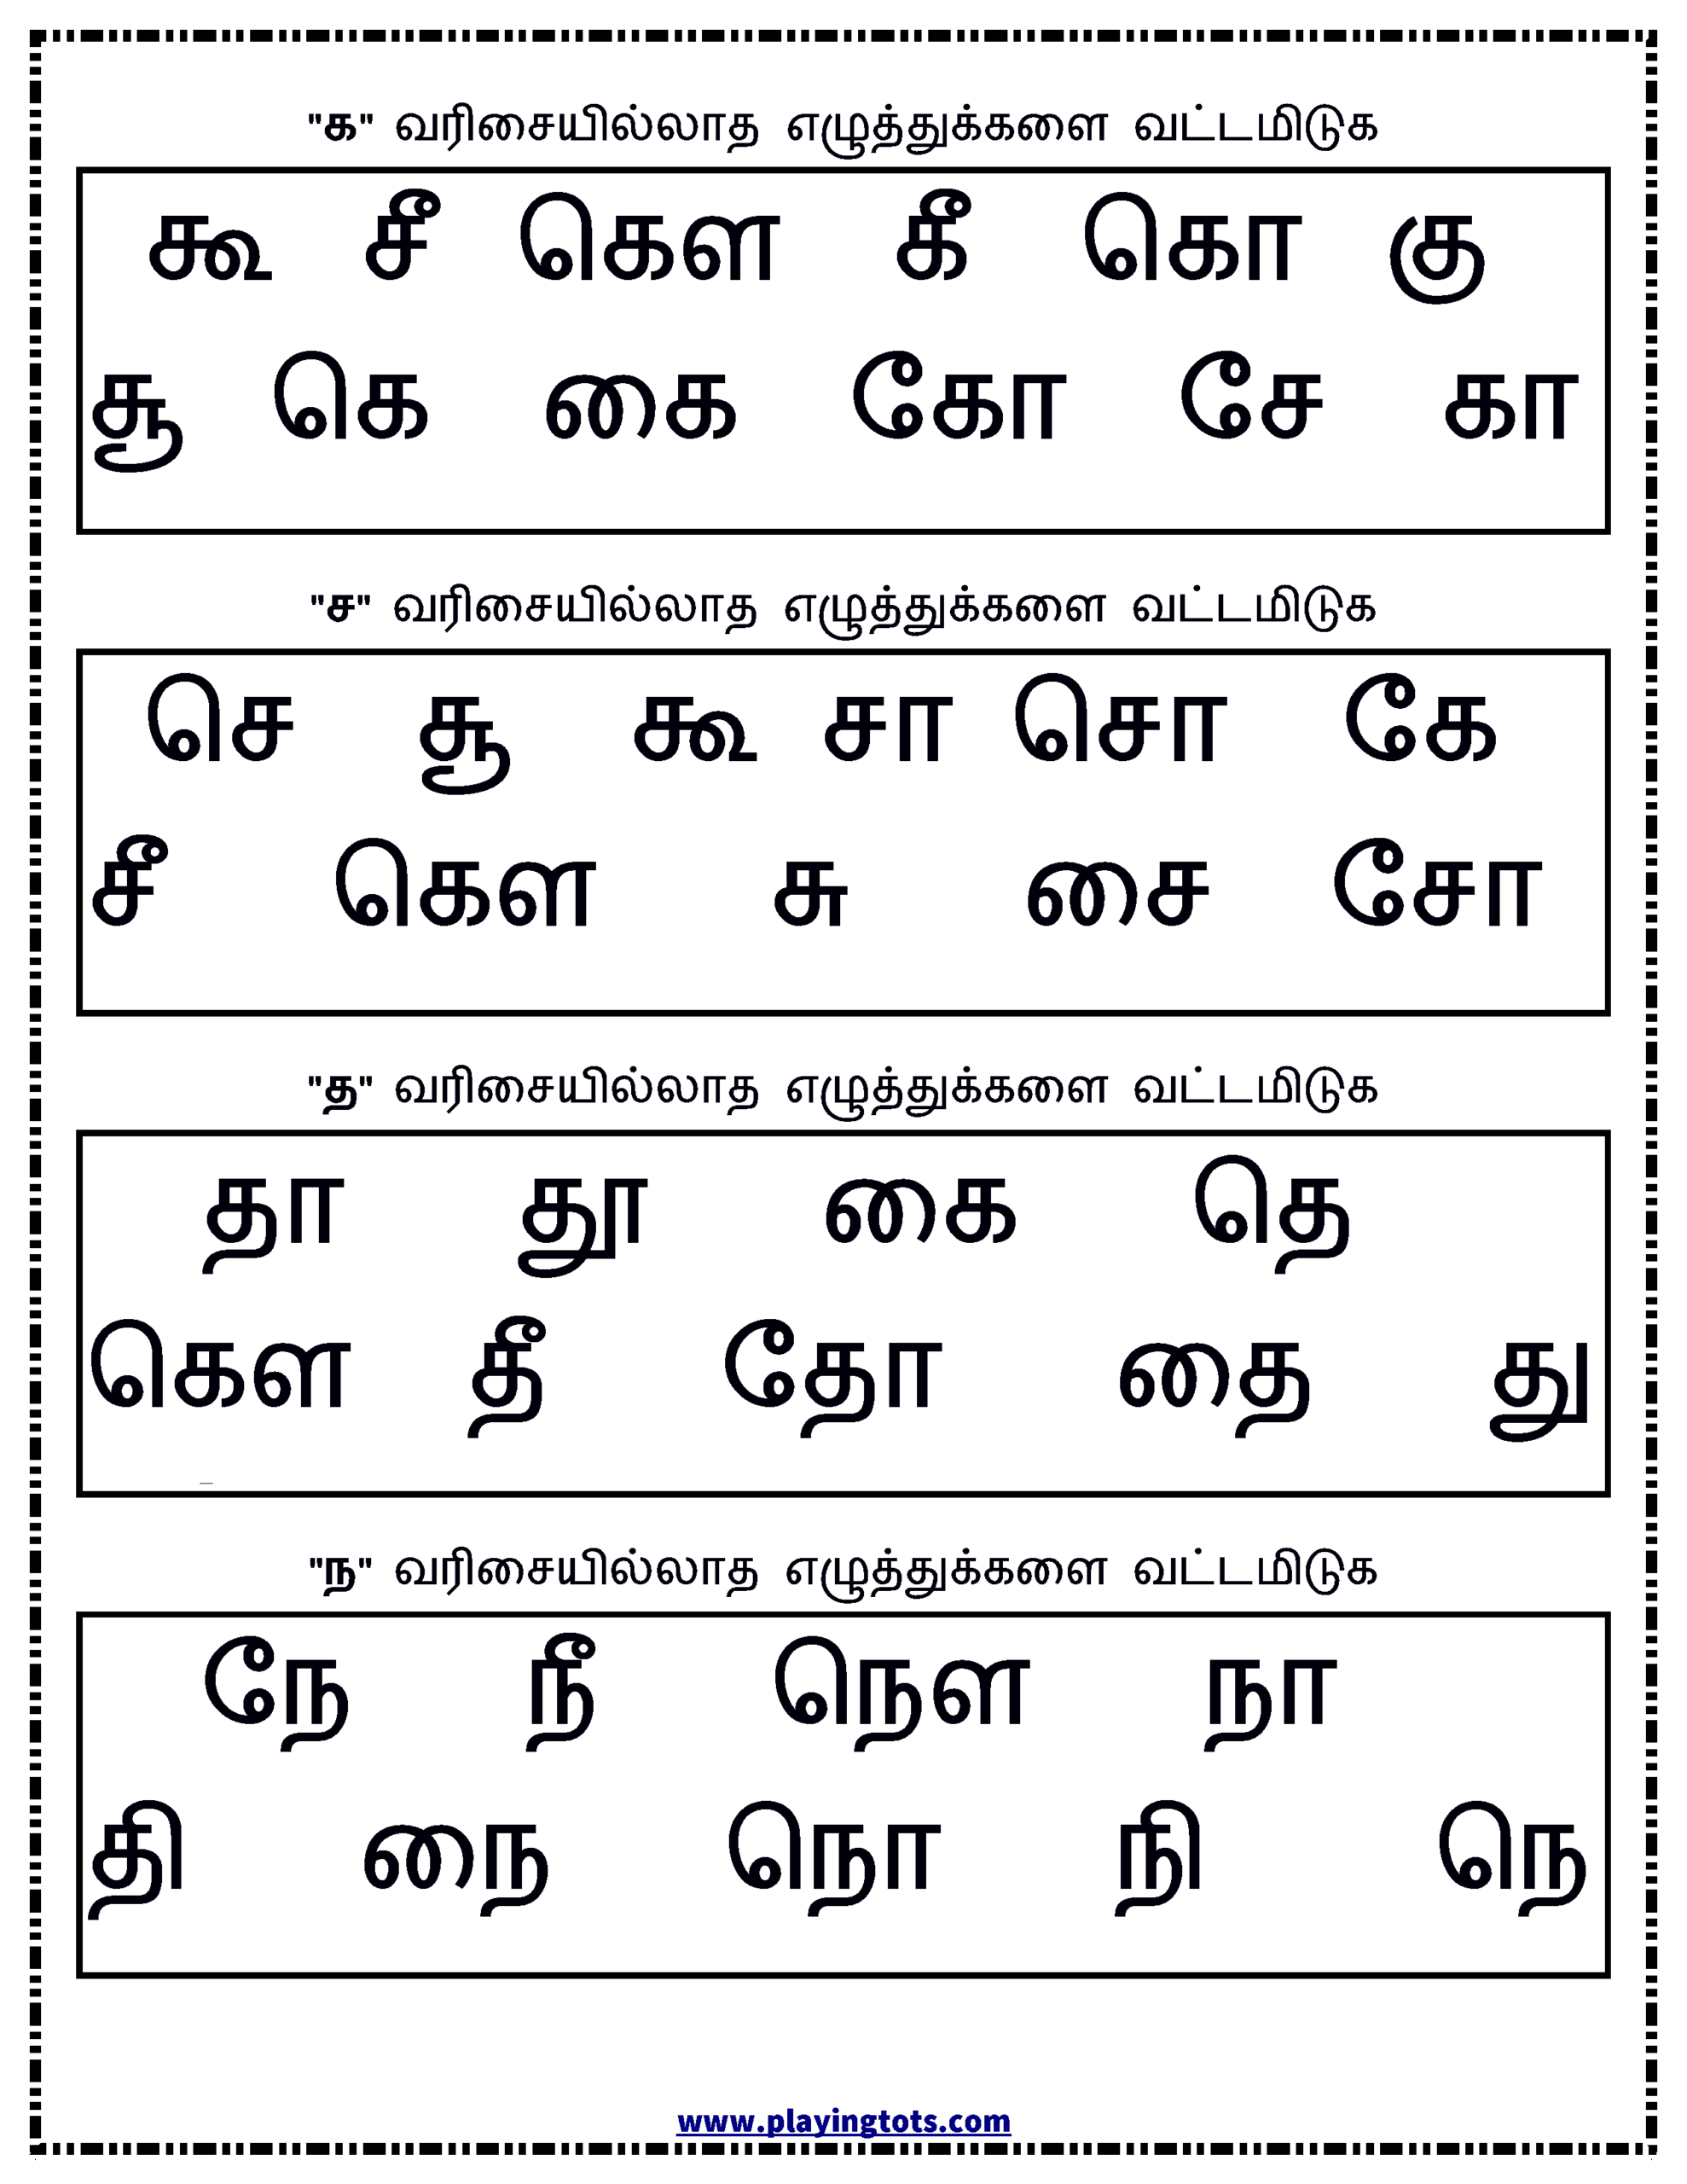 Worksheets - Tamil Letters - Odd One Out intended for Tamil Letters Tracing